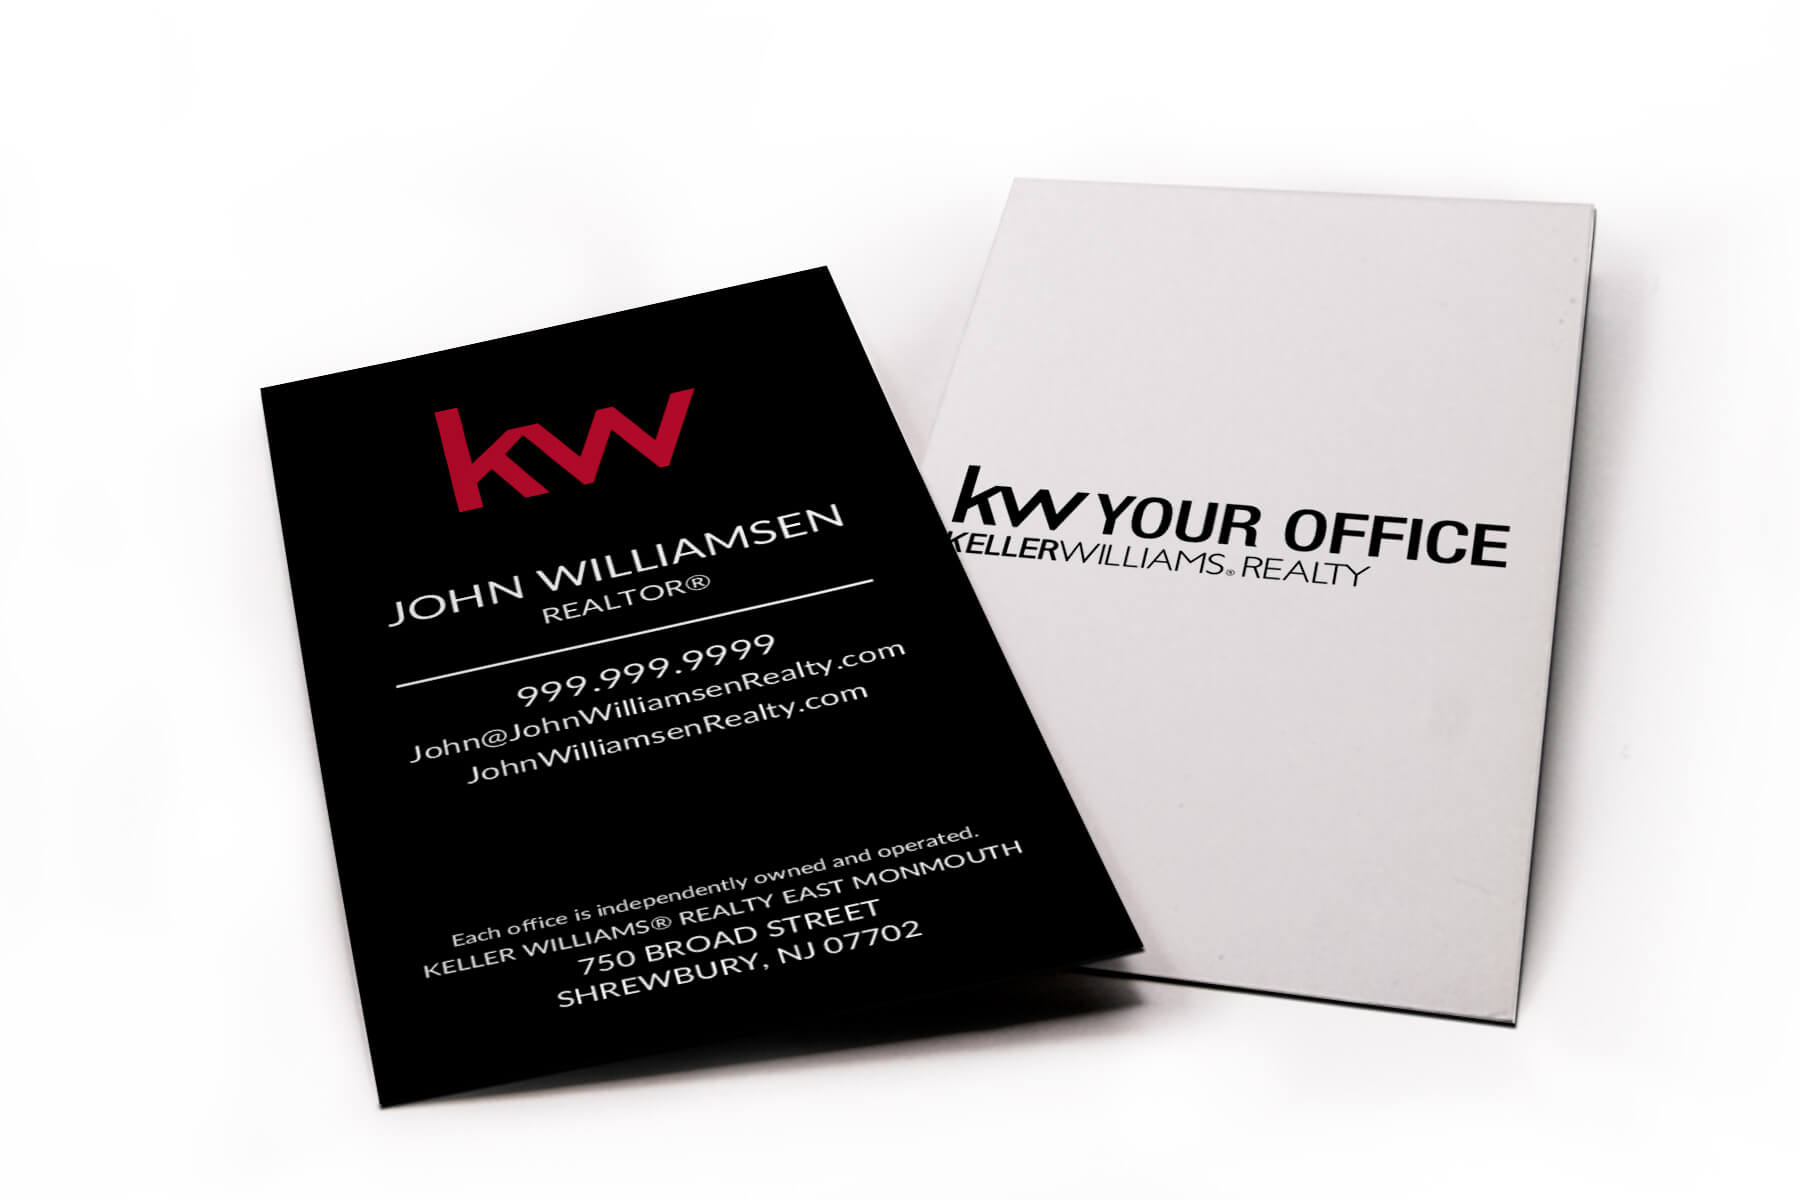 Vertical Black Kw Business Card For Keller Williams Business Card Templates